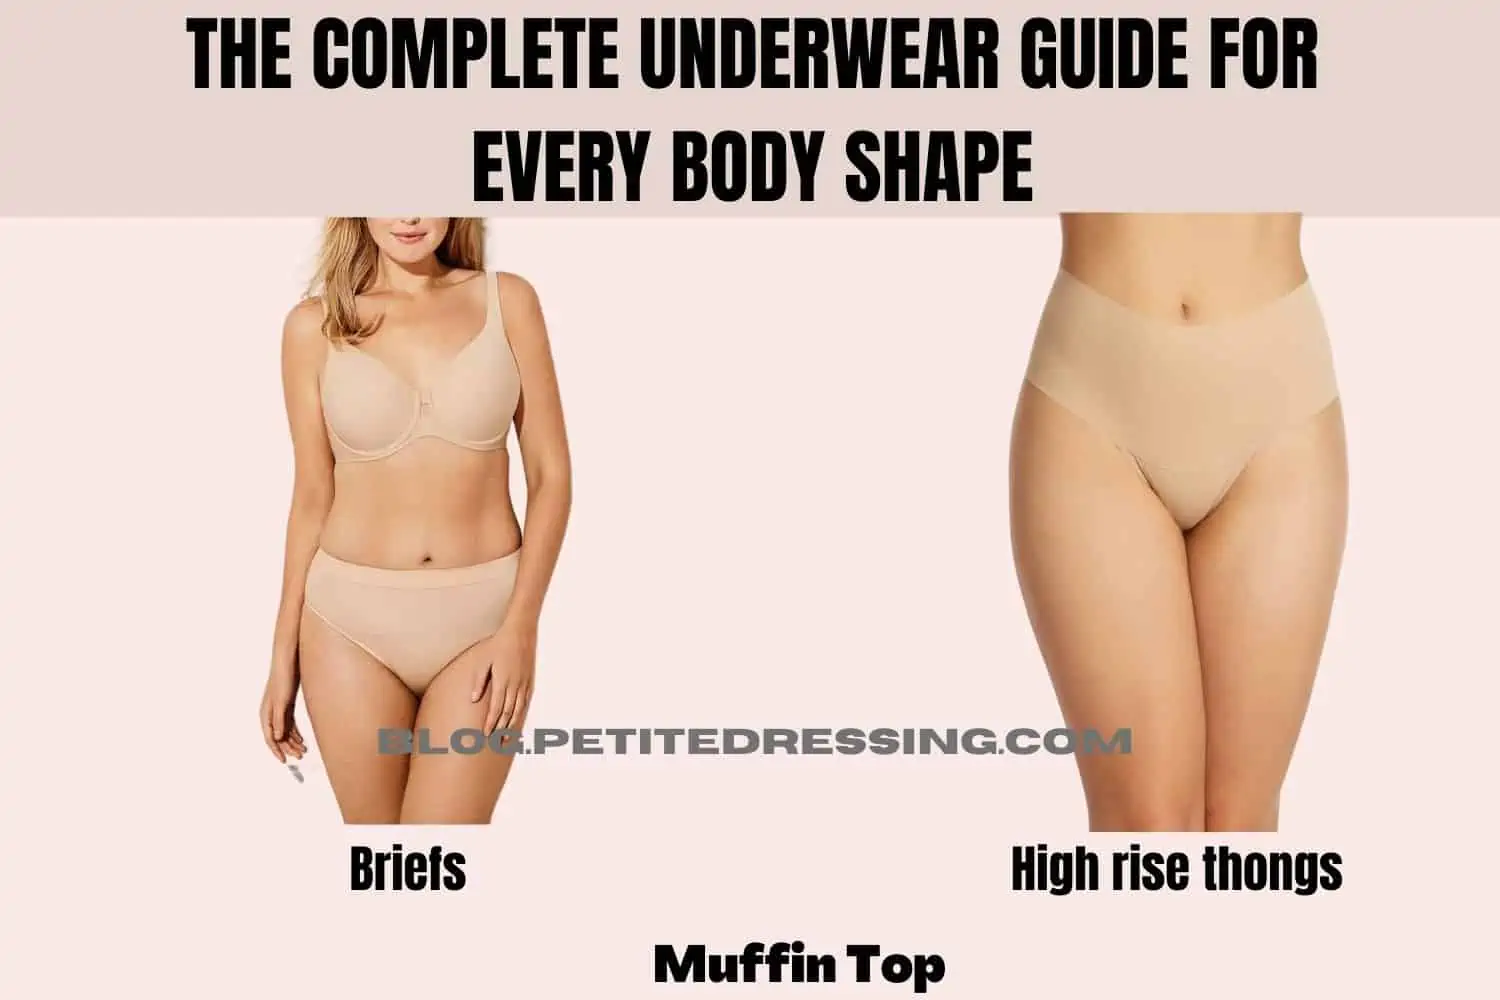 Types of Tights & Tight Styles for Every Body Type